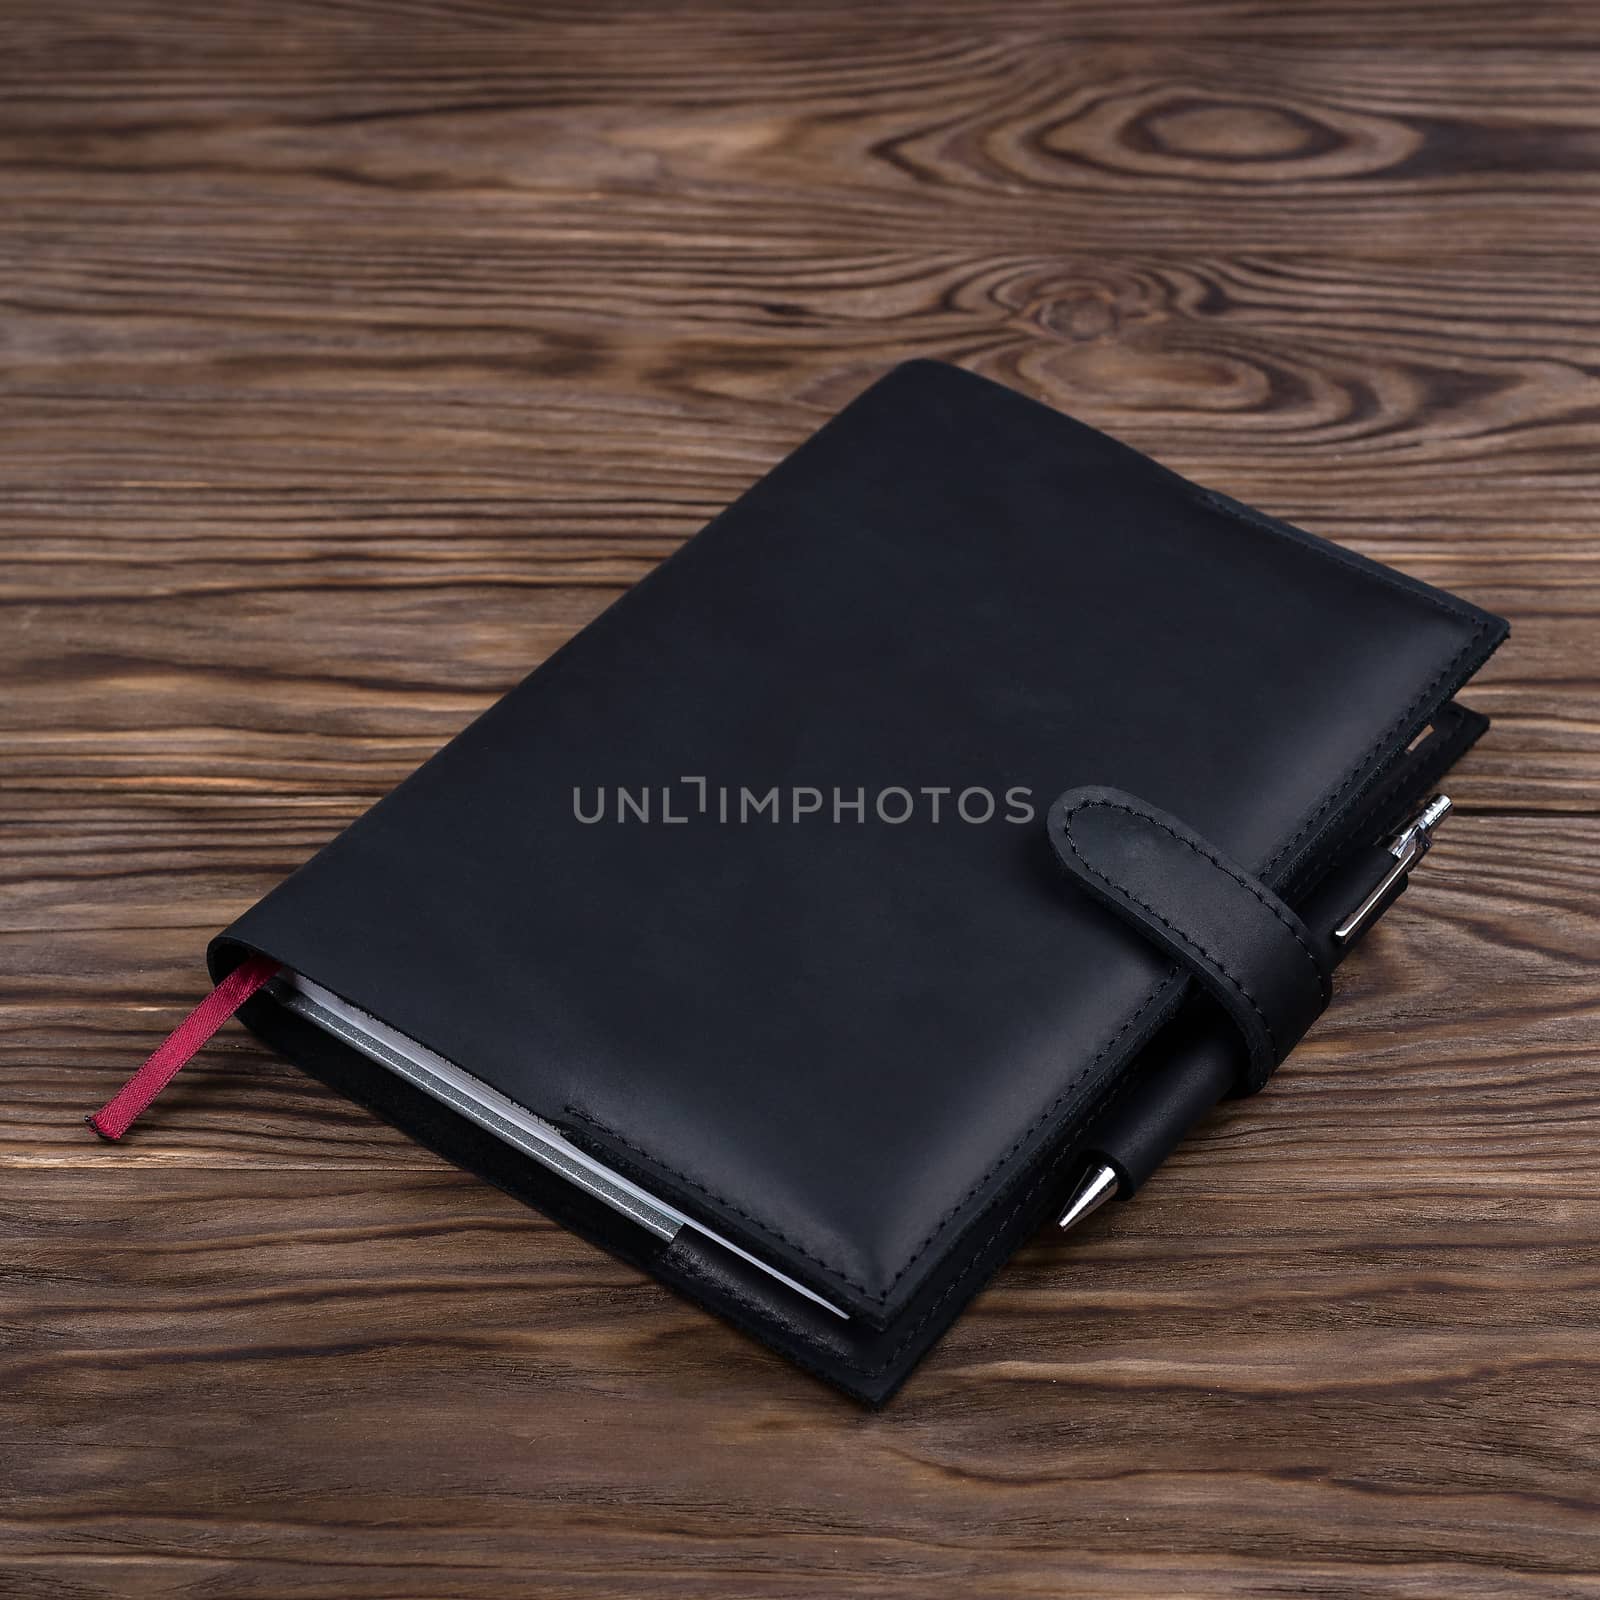 Black handmade leather notebook cover with notebook and pen inside on wooden background. Stock photo of luxury business accessories. by alexsdriver